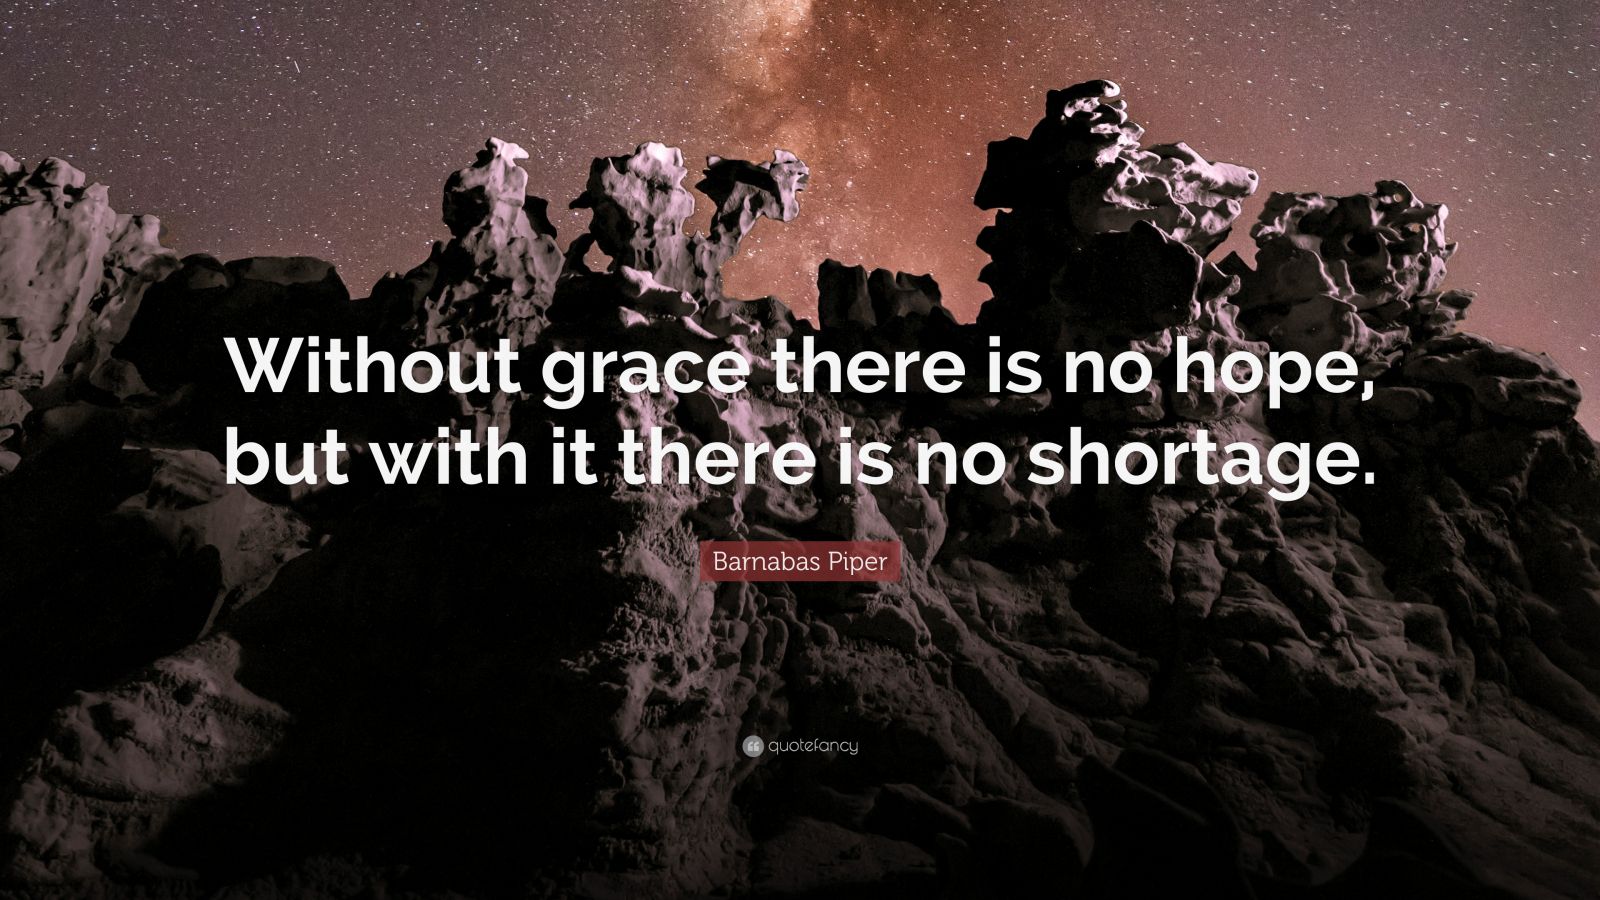 Barnabas Piper Quote: “Without grace there is no hope, but with it